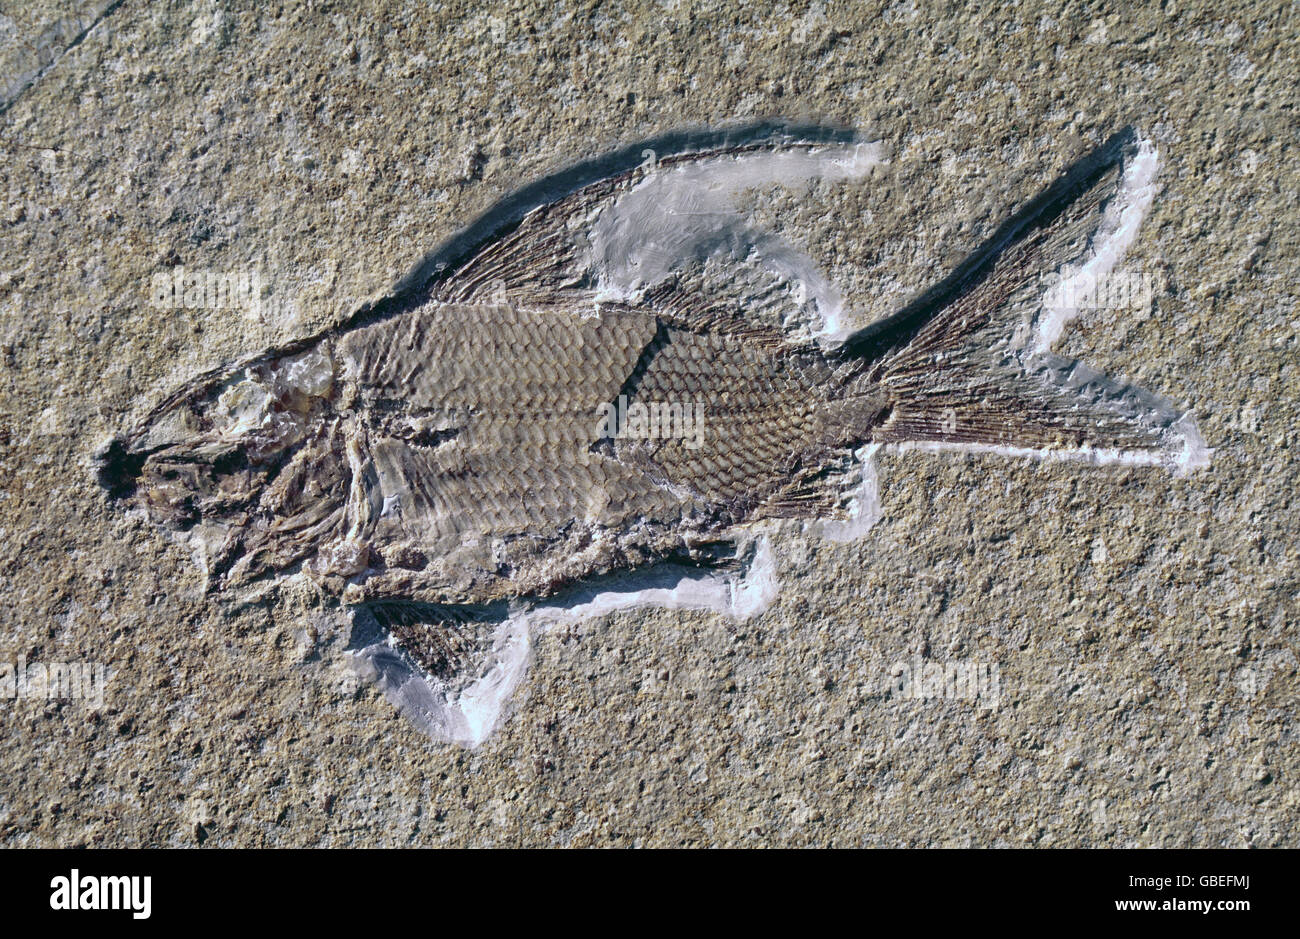 prehistory, fossils, zoology / animals, bony fish (Propterus speciosus), Eichstätt, historic, historical, fossil, fish, Upper Jurassic, Malm, Jurassic, prehistoric, Additional-Rights-Clearences-Not Available Stock Photo